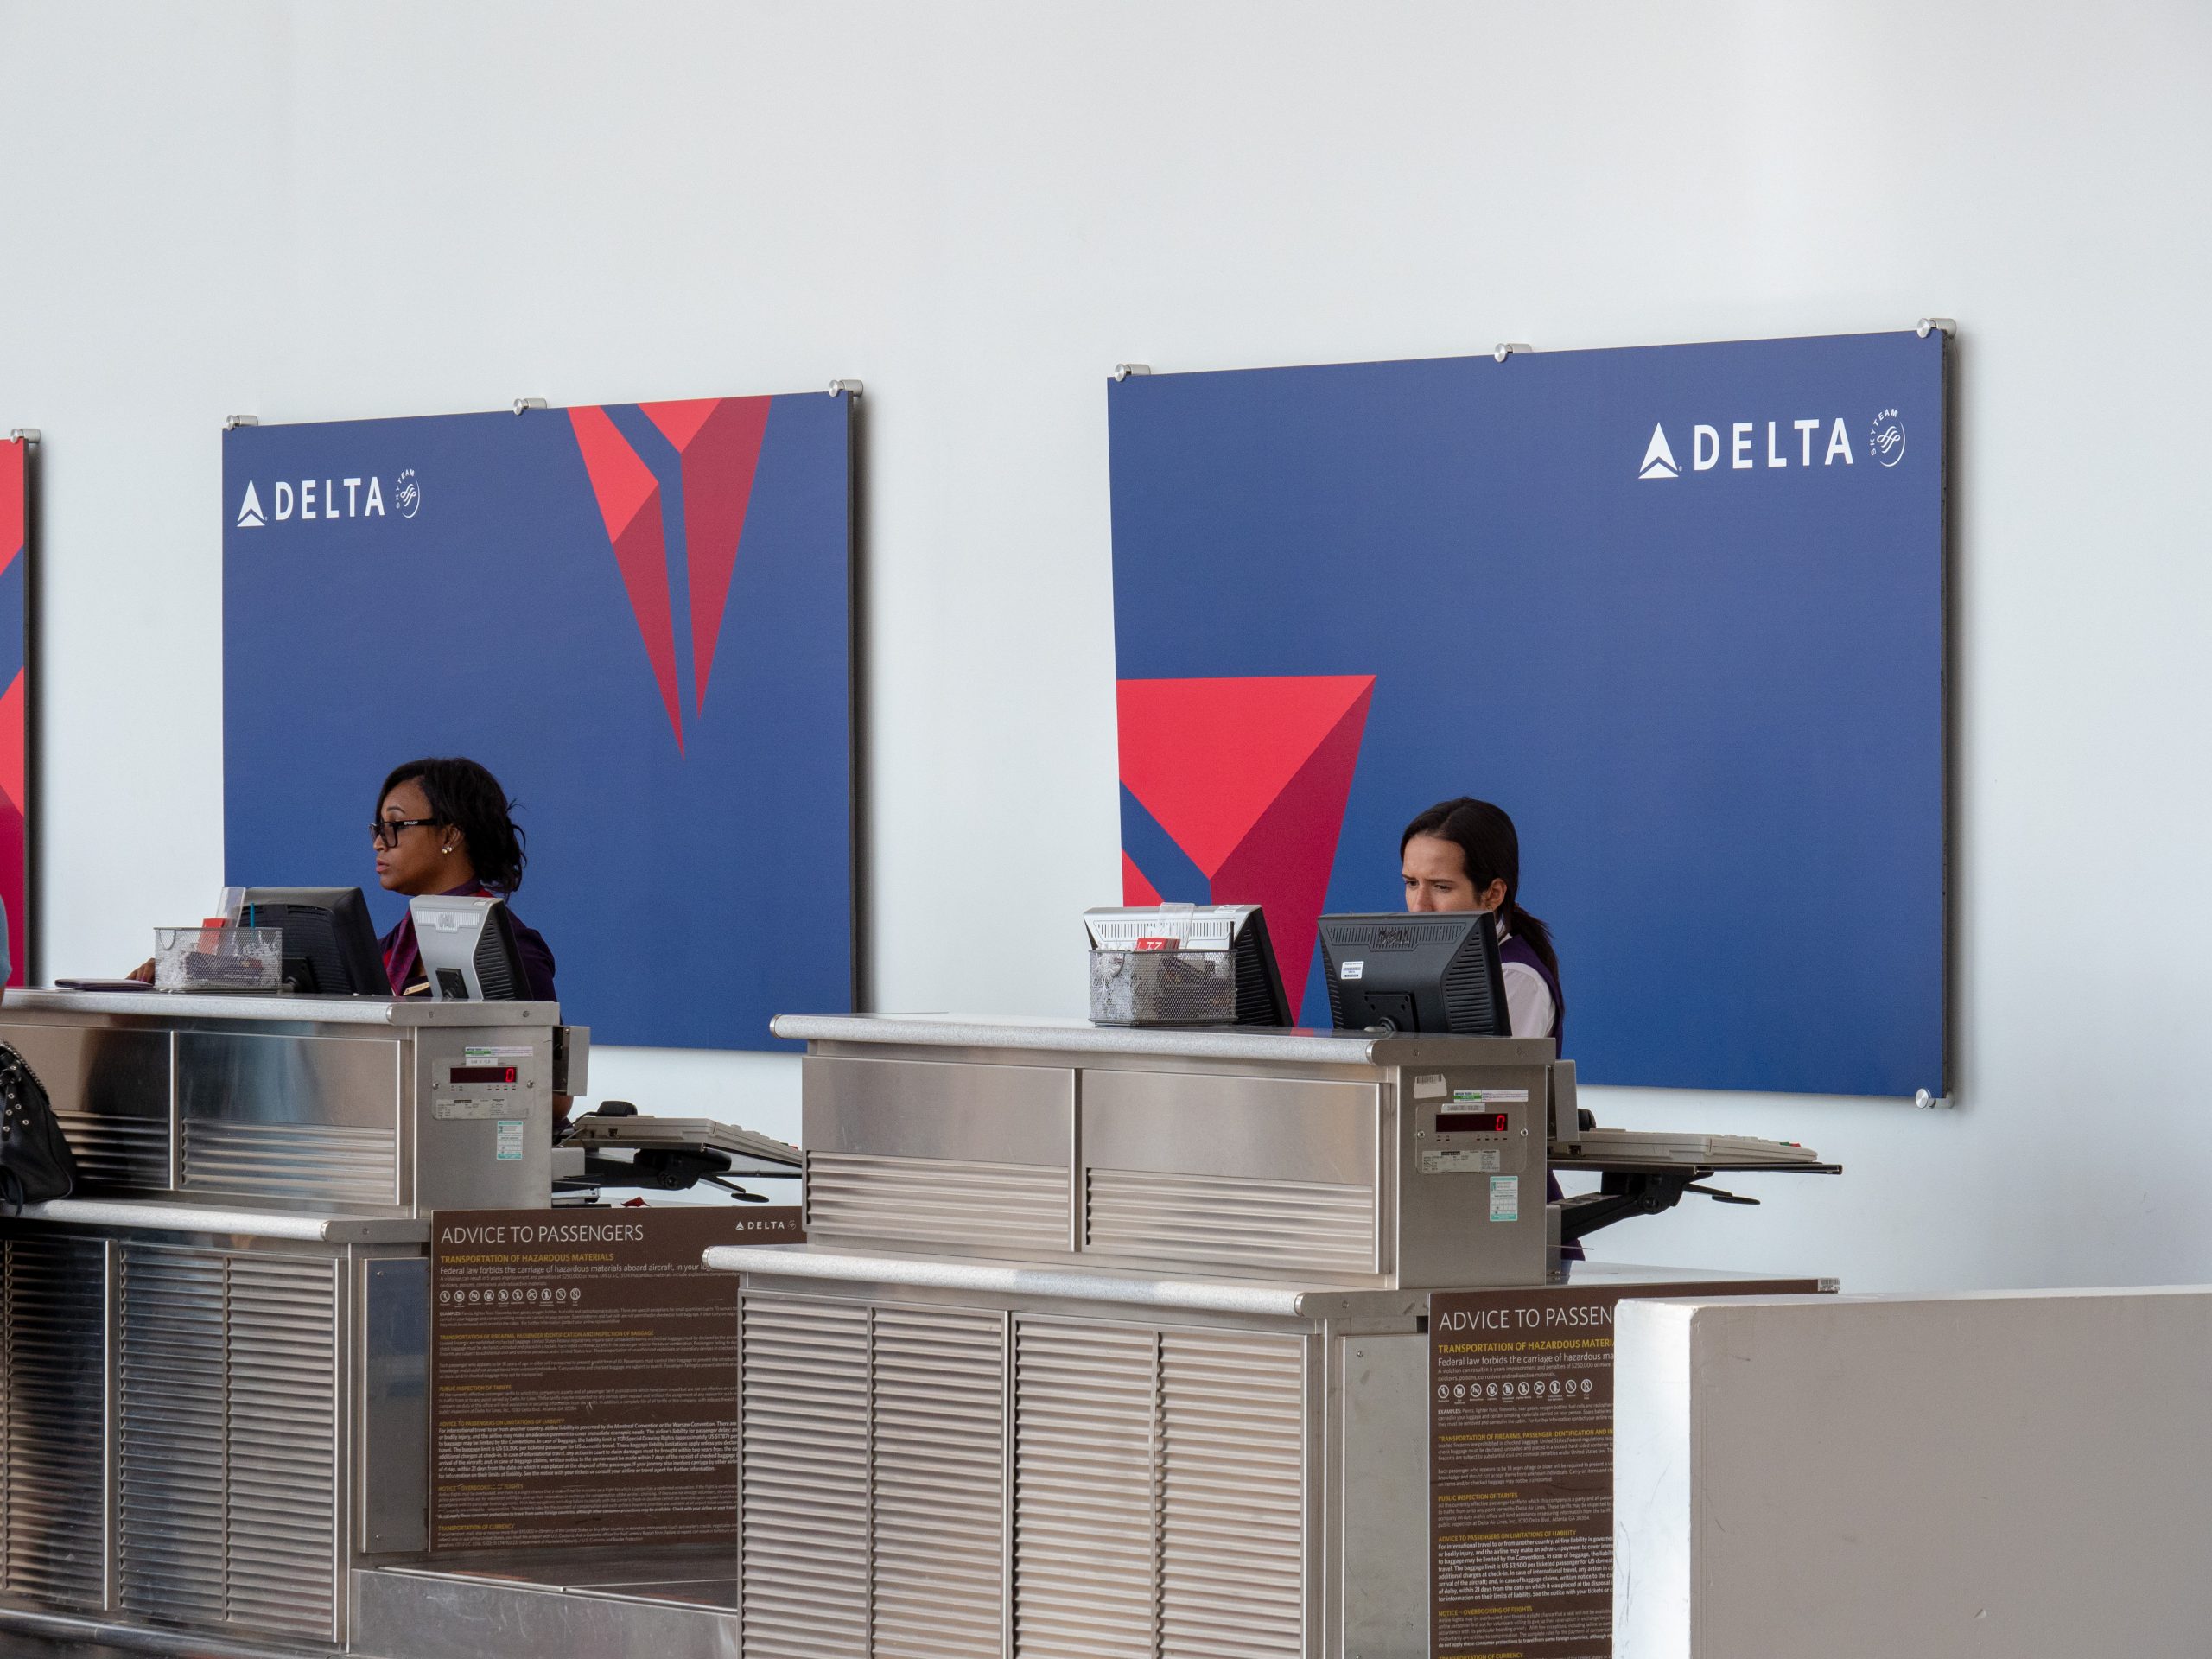 Delta offers free checked bags for Gold, Platinum and Reserve cards